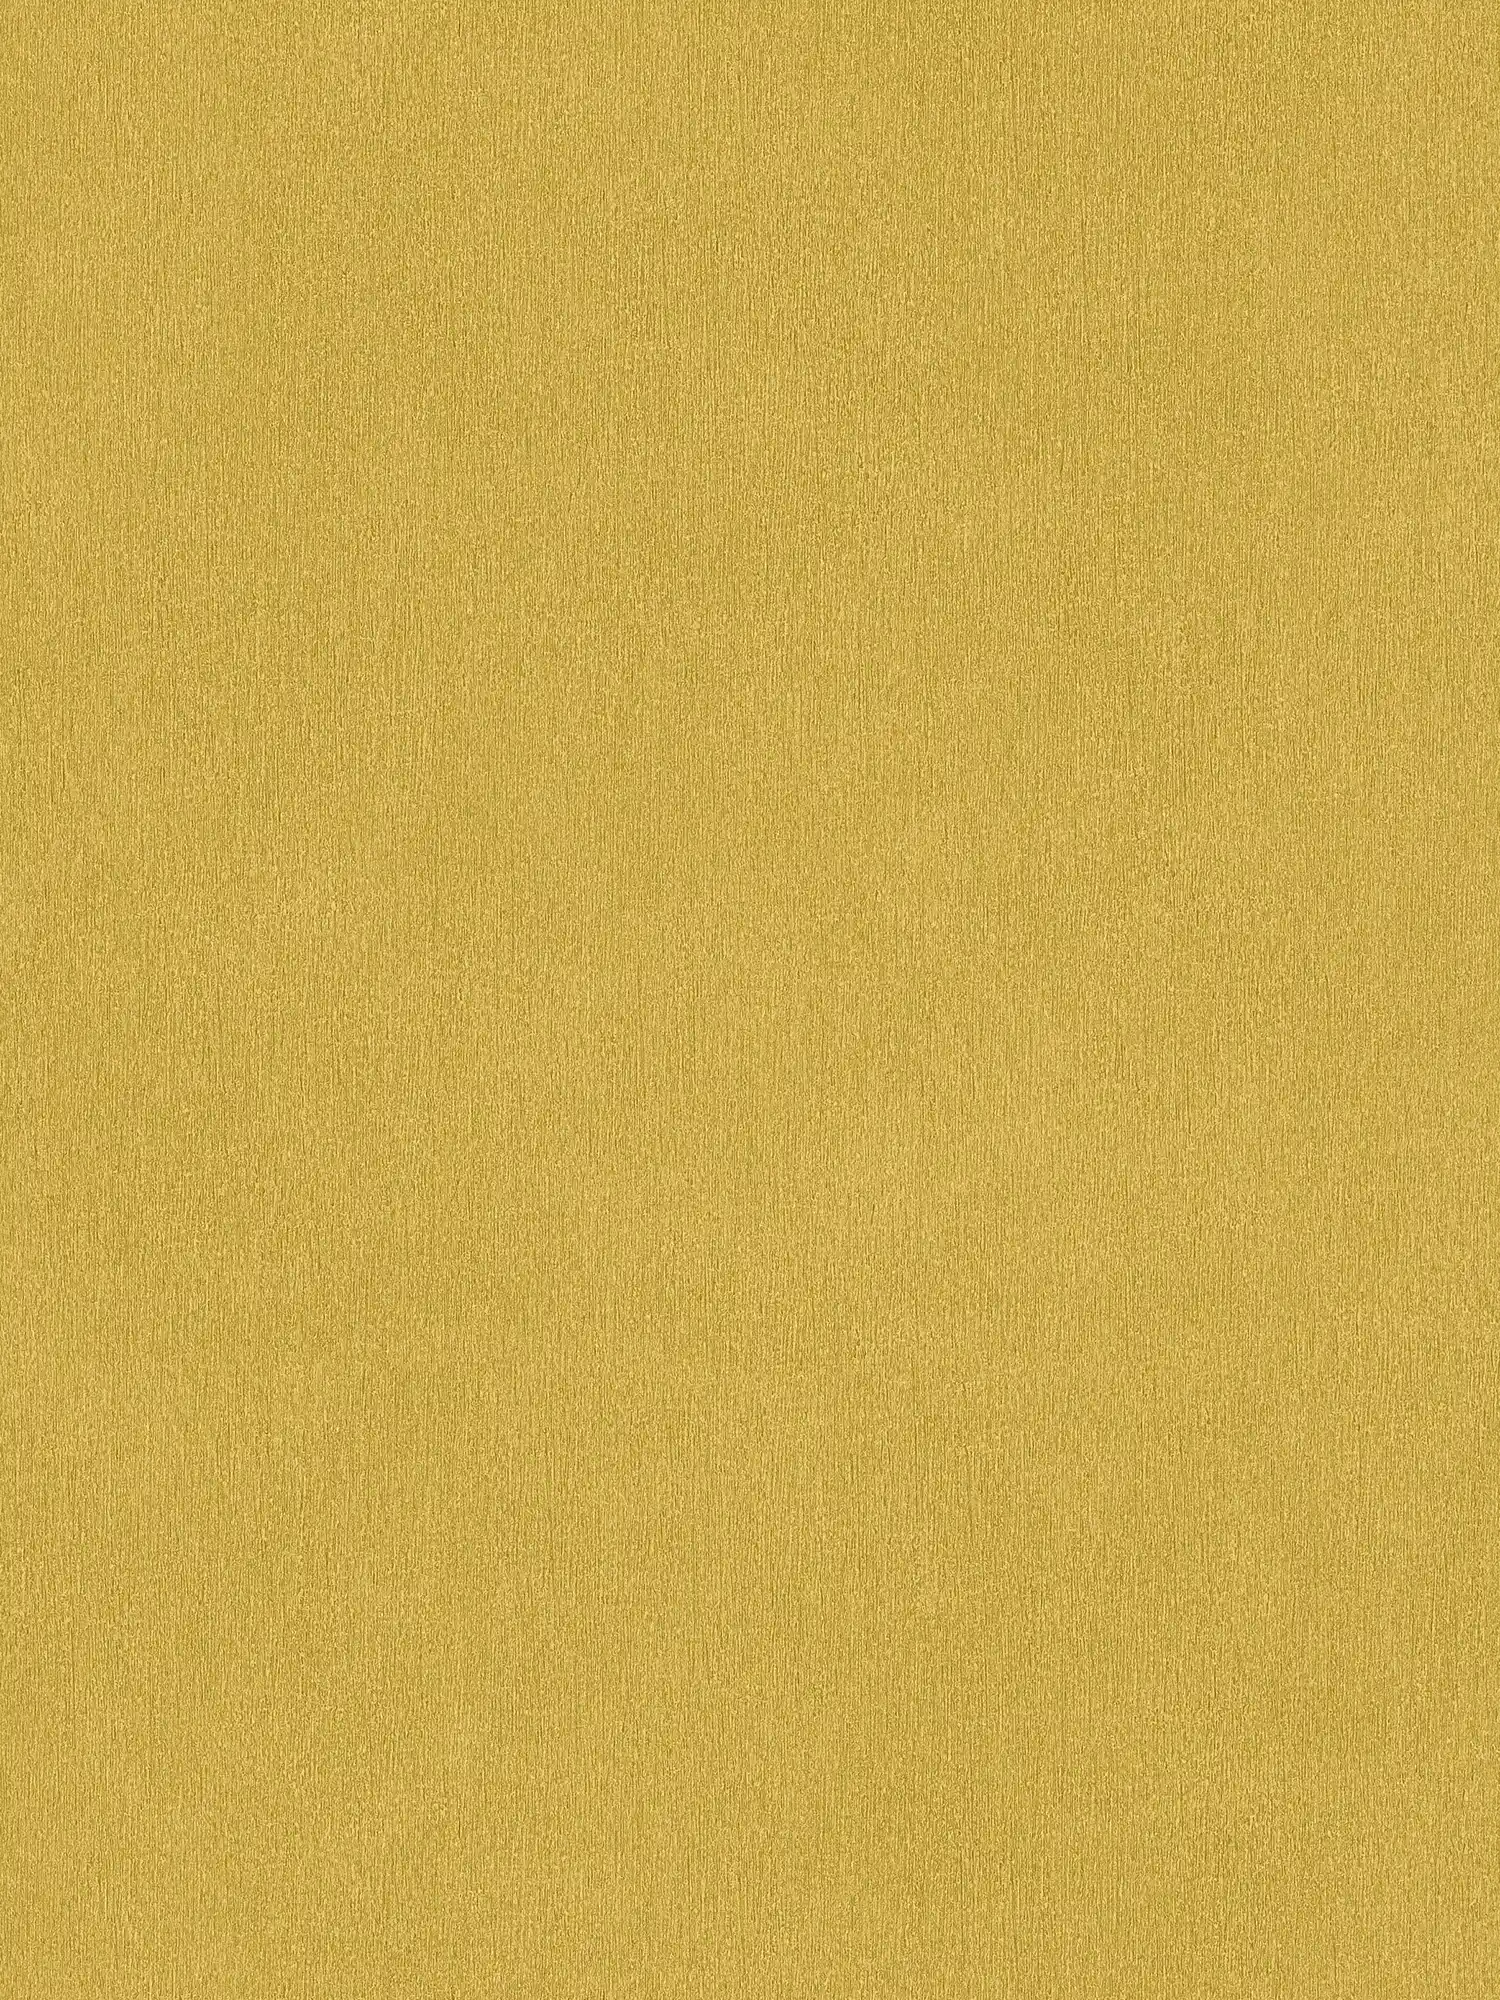 Yellow wallpaper plain with colour texture, smooth & satin
